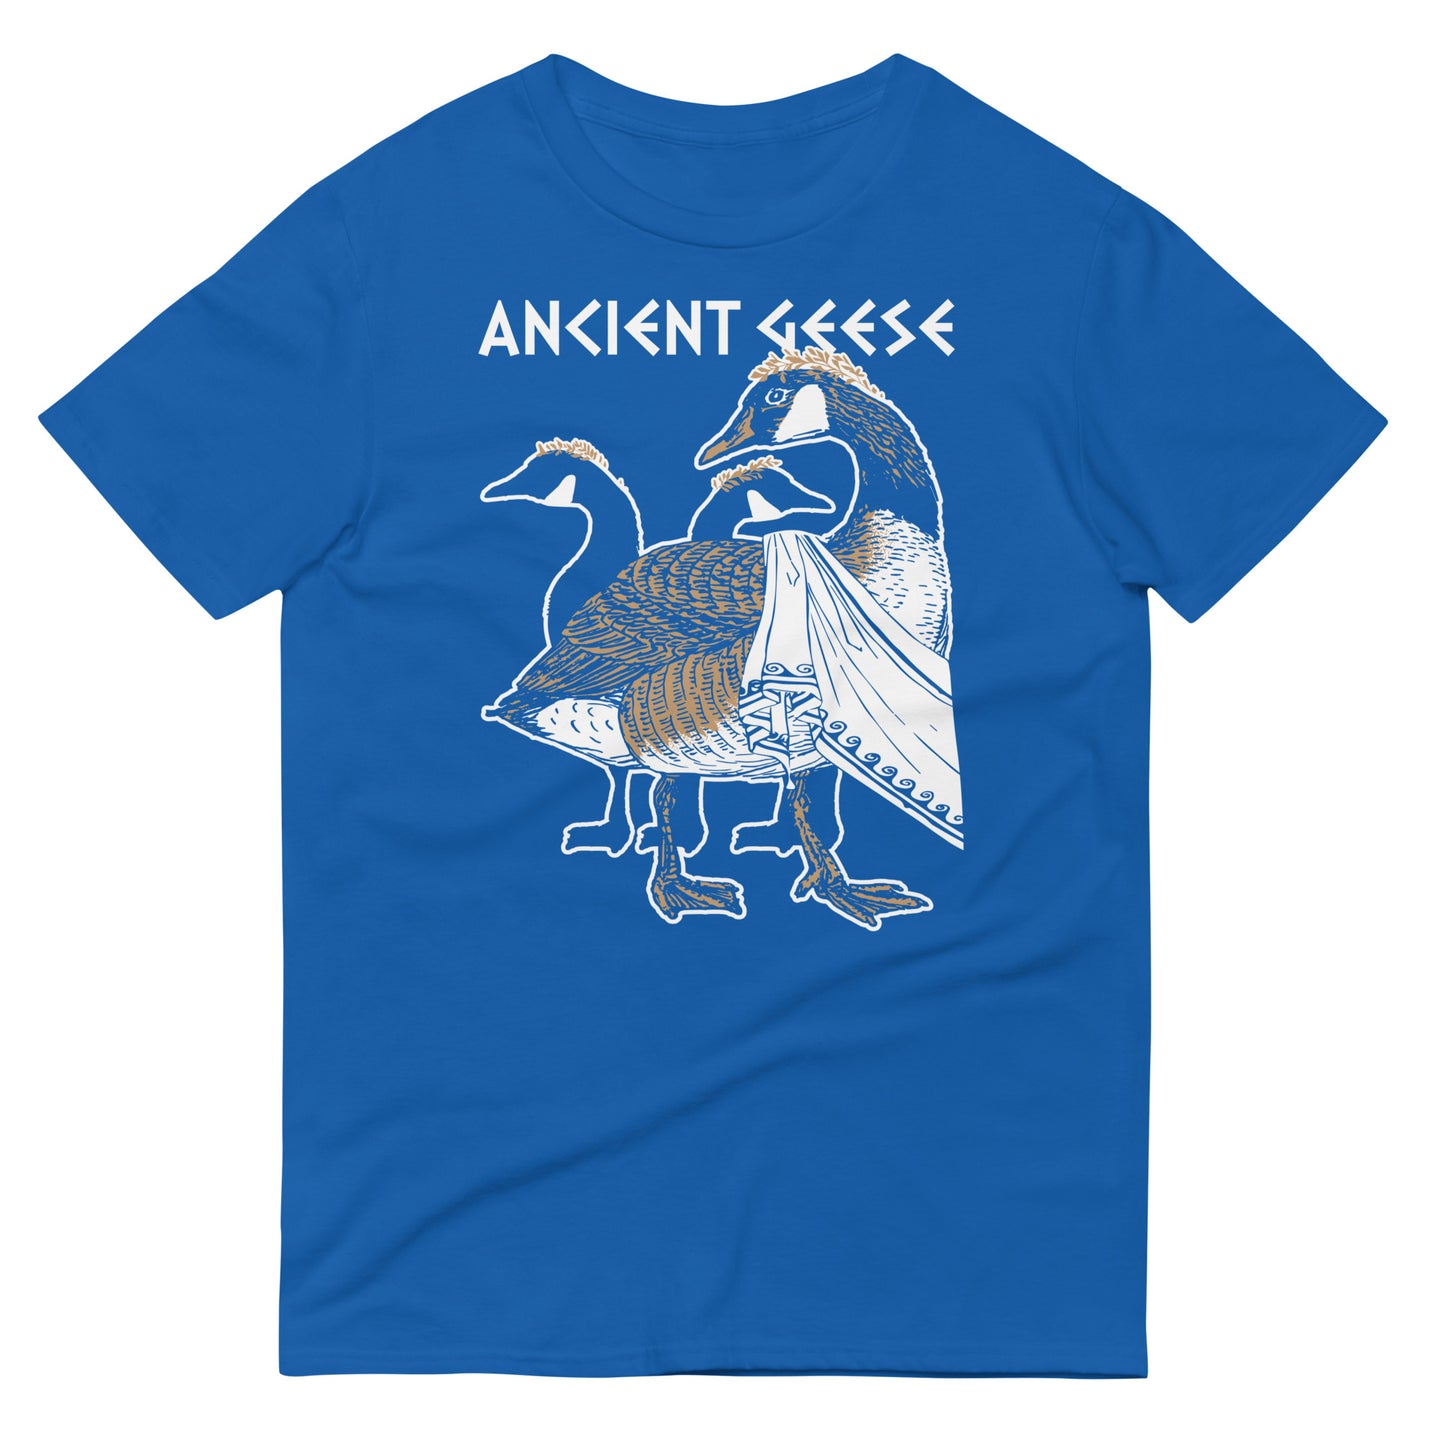 Ancient Geese Men's Signature Tee